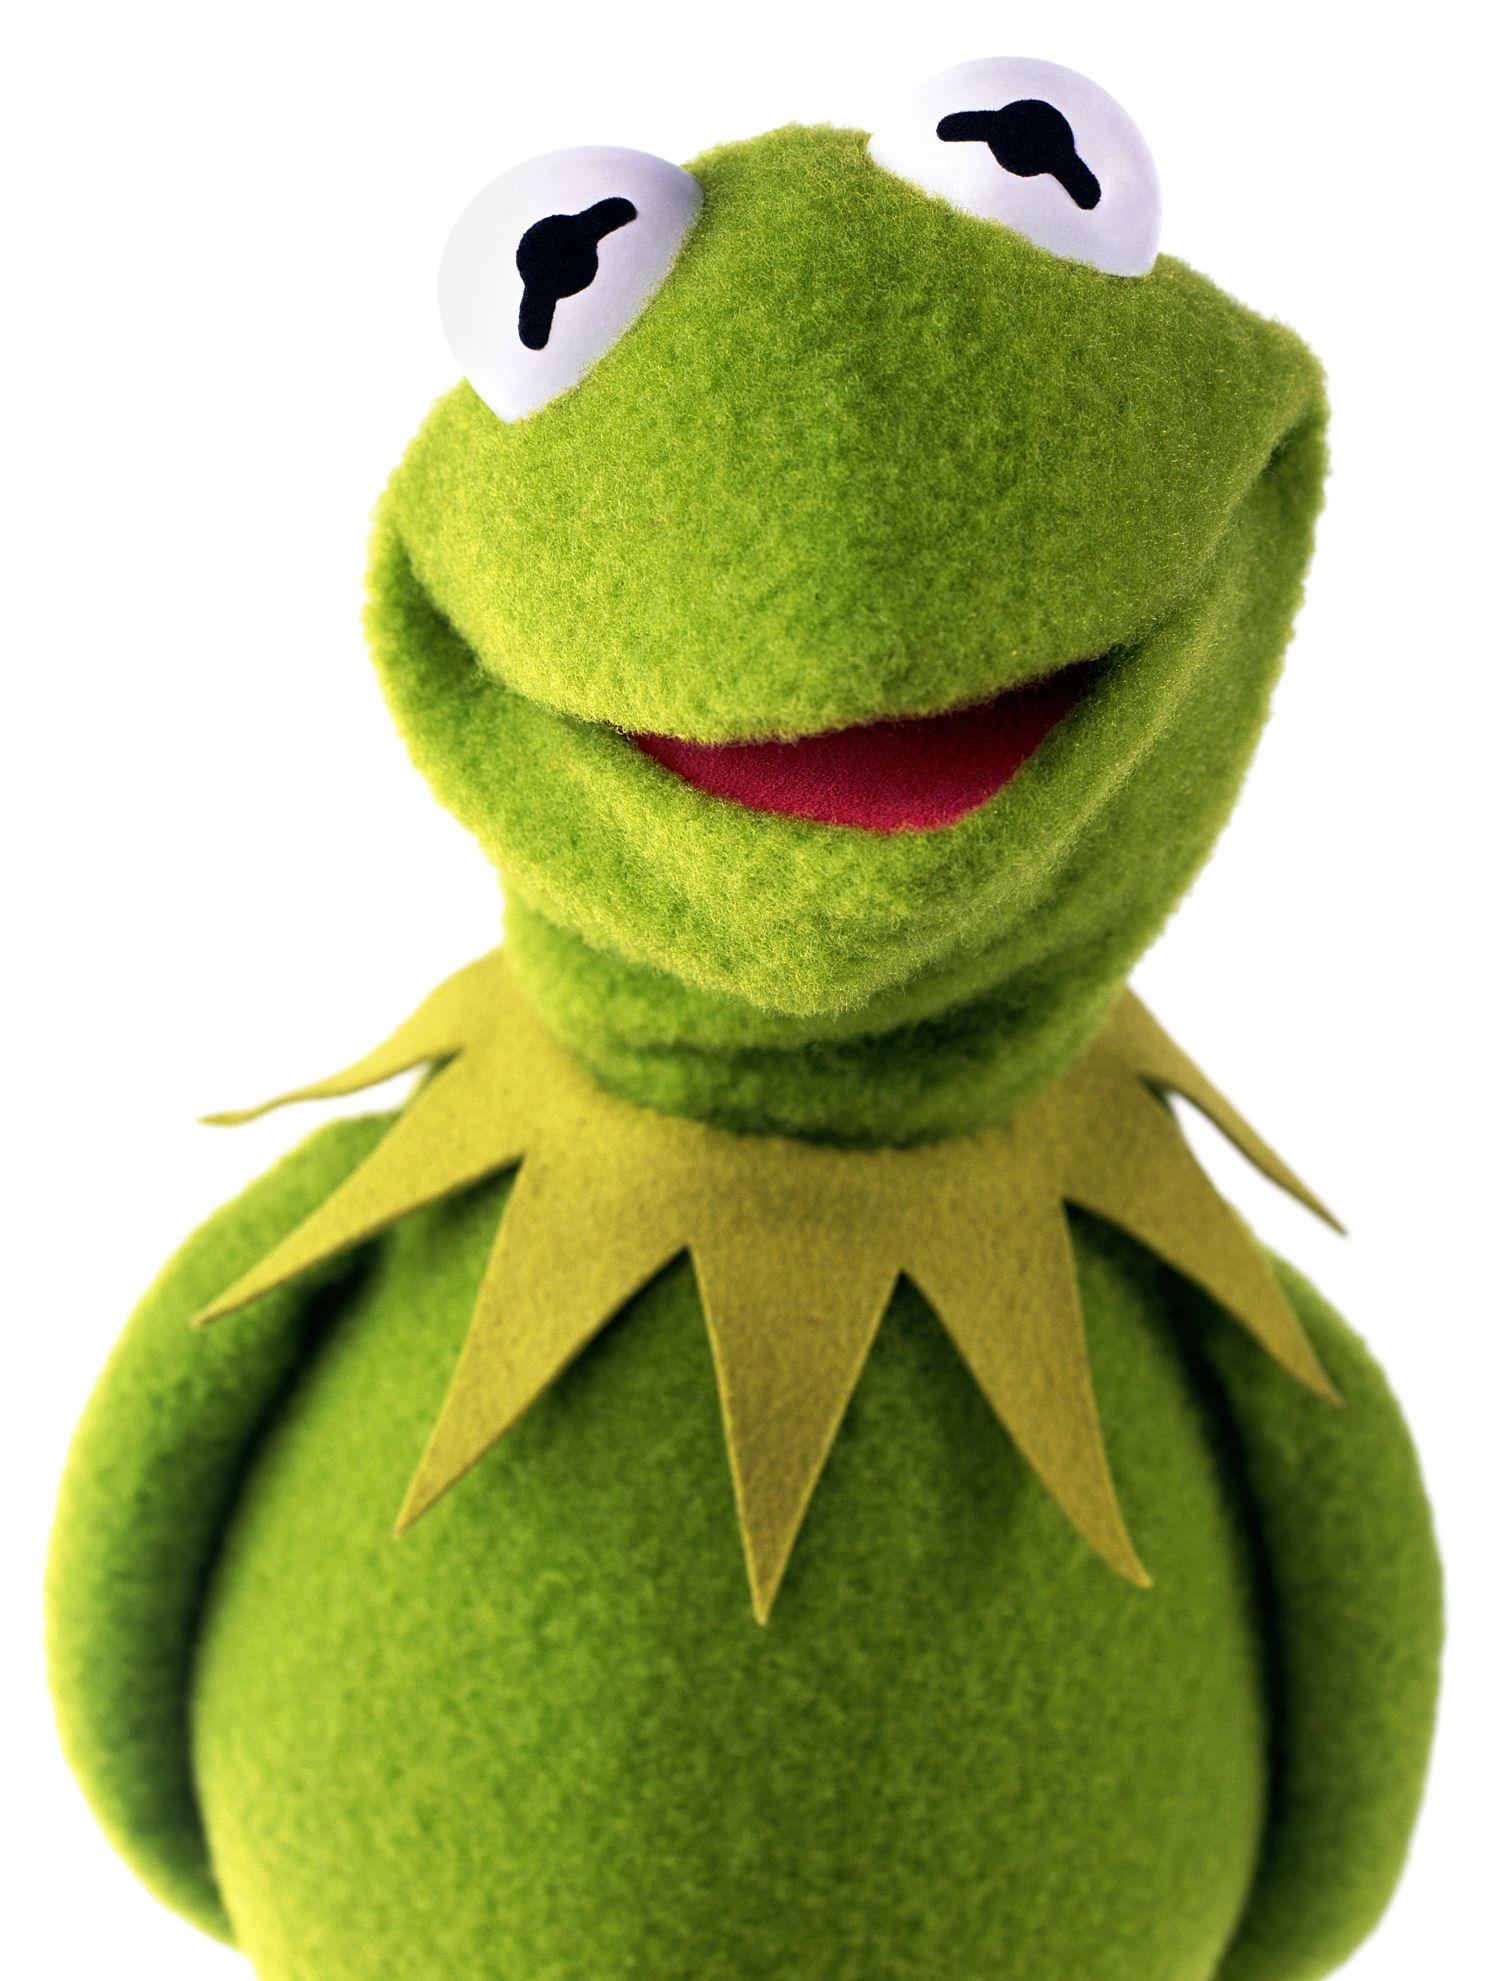 KERMIT THE FROG QUOTES